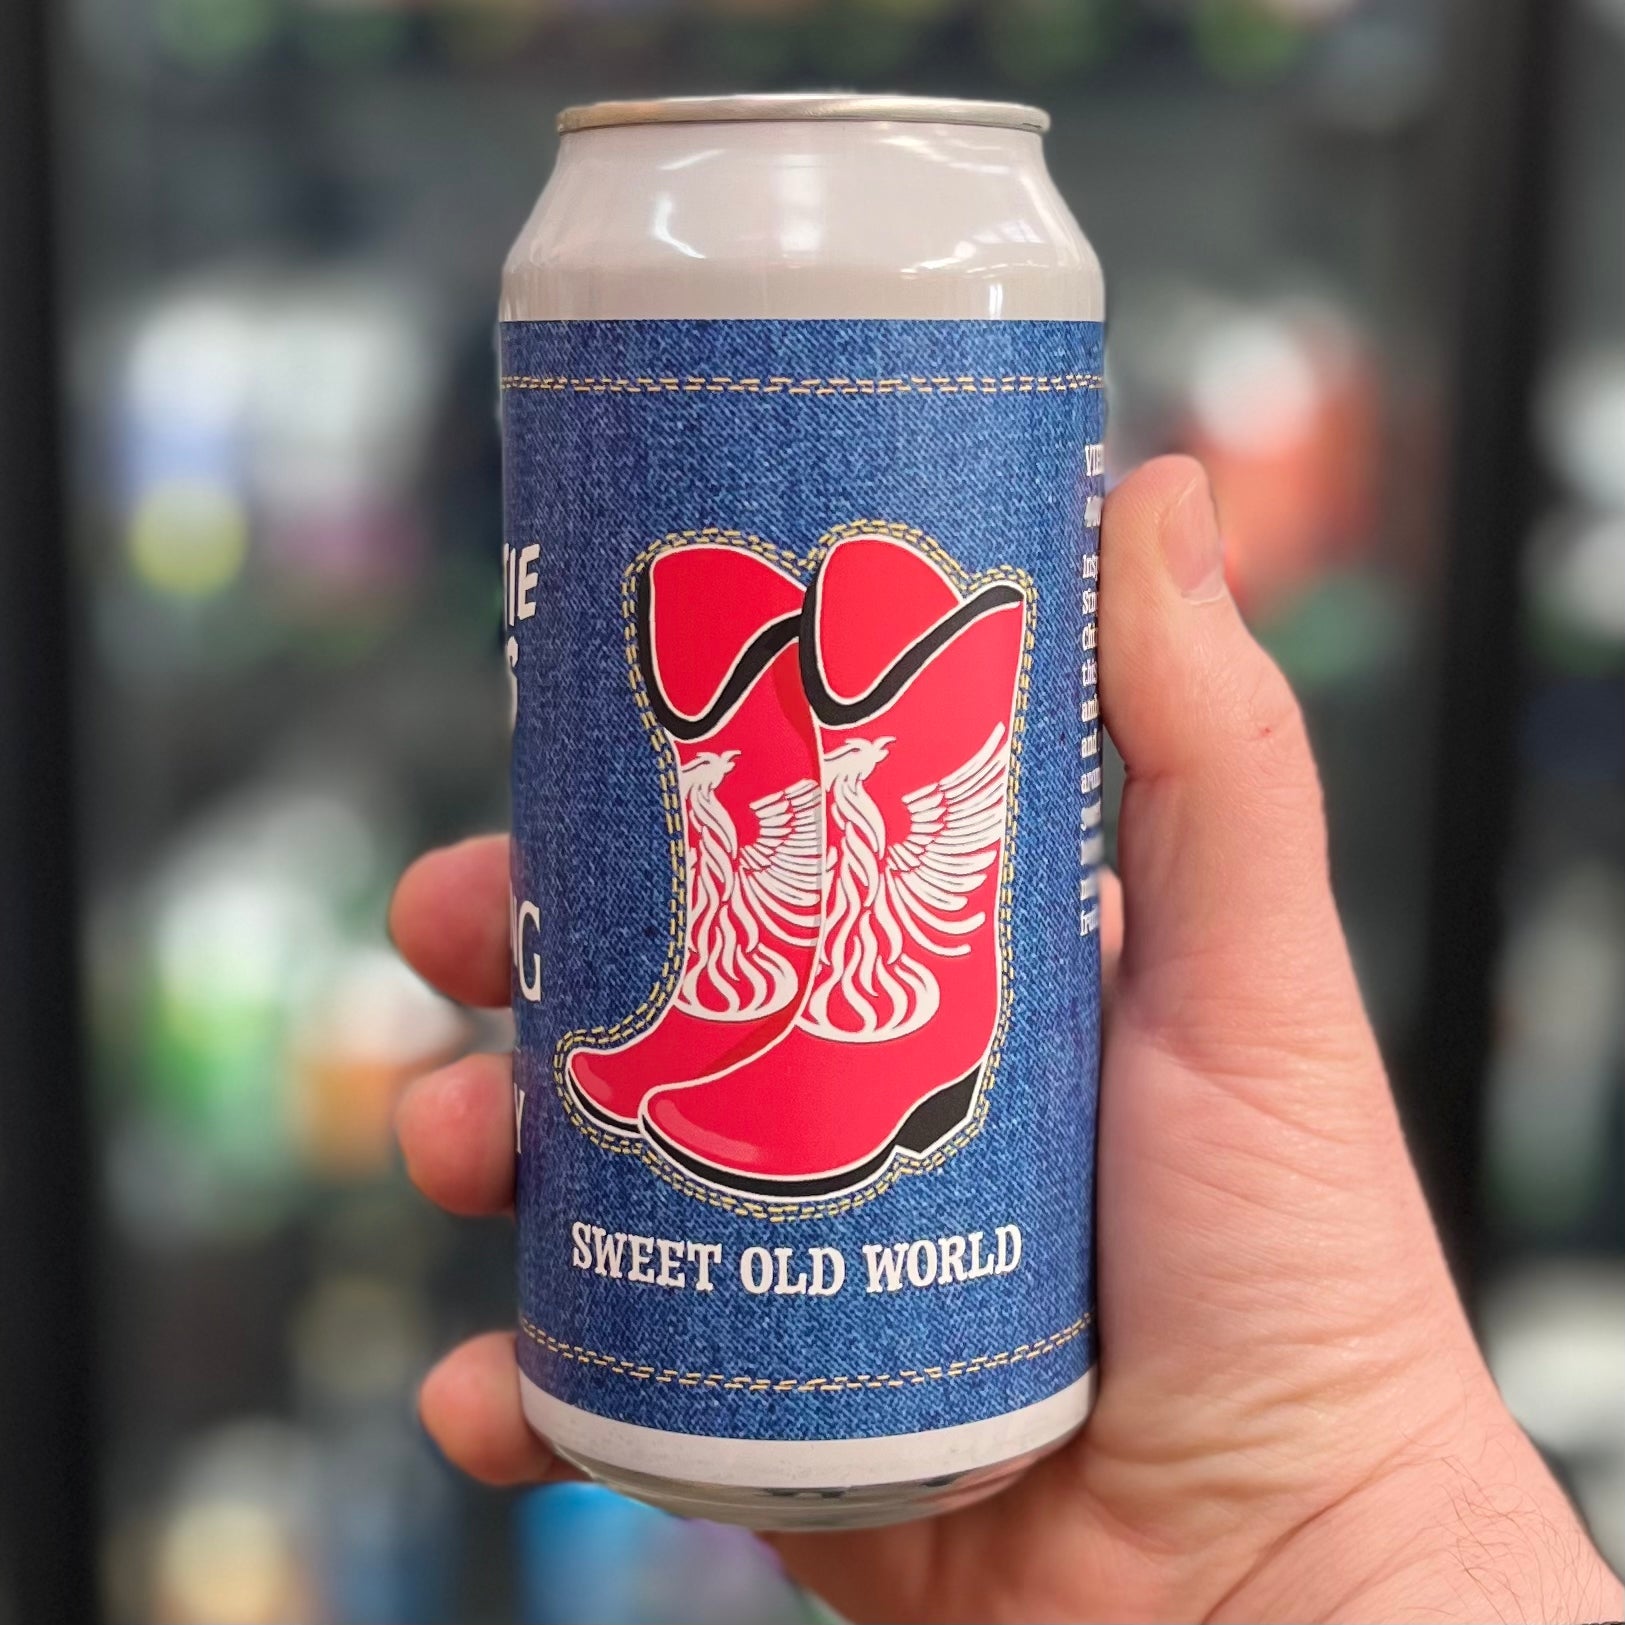 Yeastie Boys Yeastie Boys X Teeling Whiskey Sweet Old World Vienna Lager Pilsner/Lager - The Beer Library